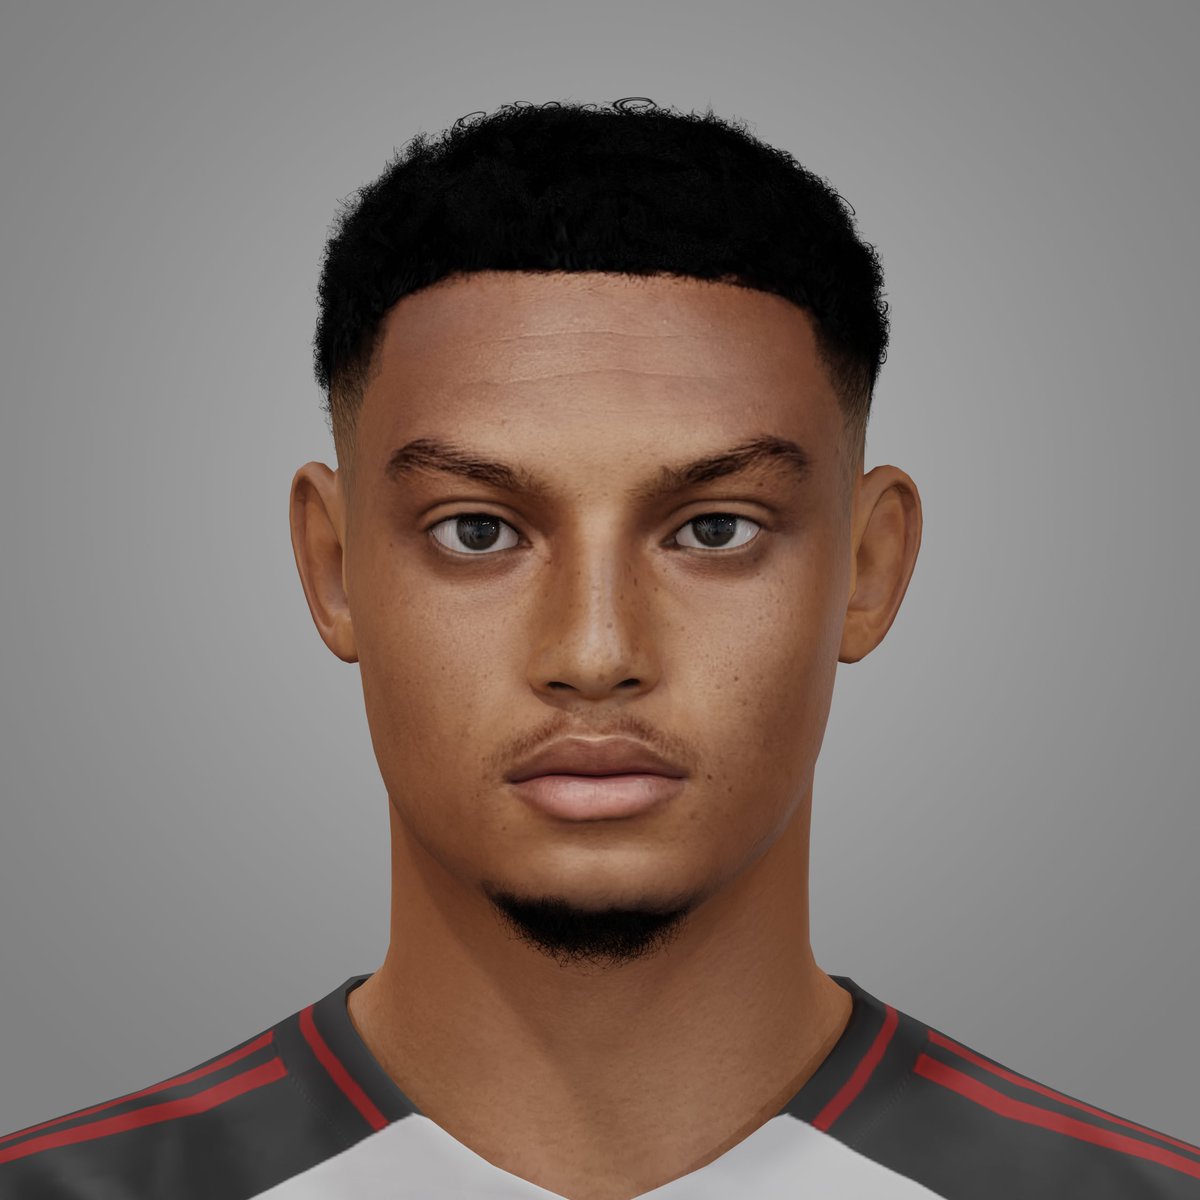 Steven Van Der Sloot | RENDER PREVIEW

📇 Contact me for personal face or request!

#nerwin64 #fifa23 #fc24 #fifafaces #fifaMods #nextgen